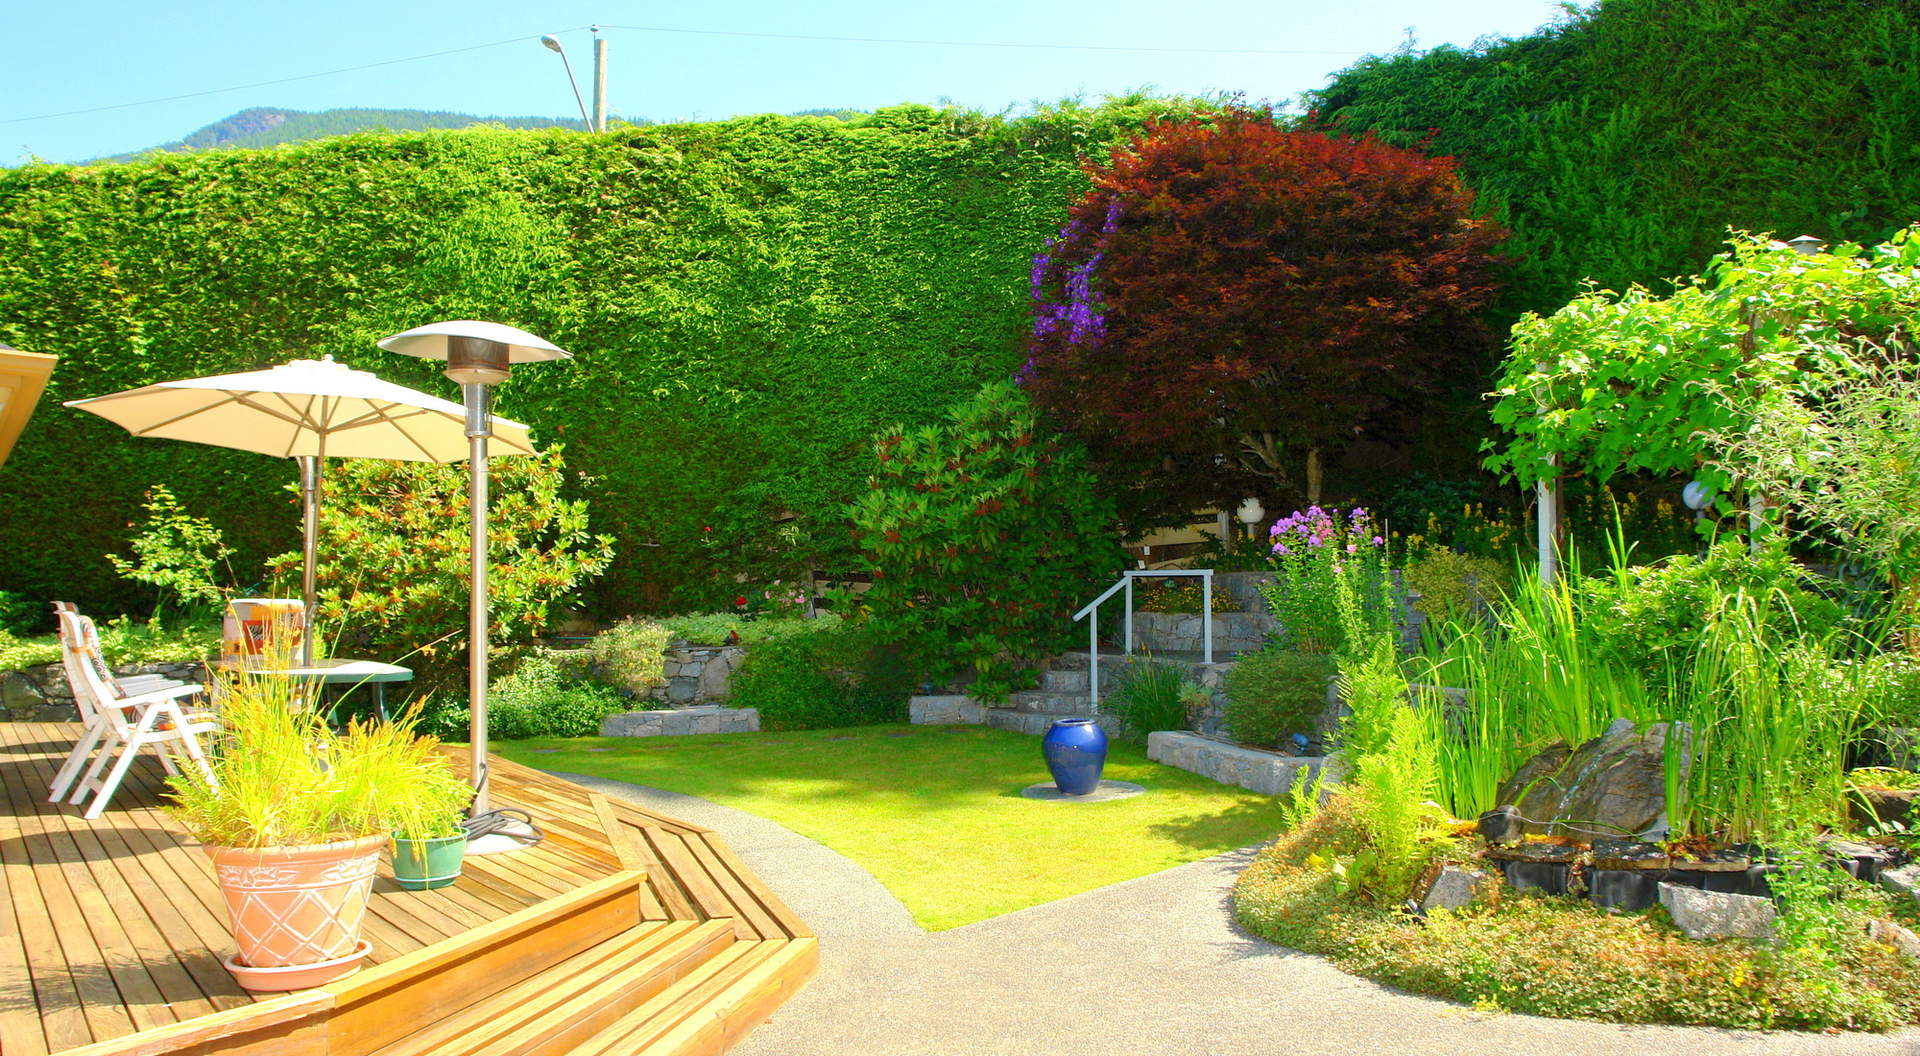 Complete Privacy and an Award Winning Gardens